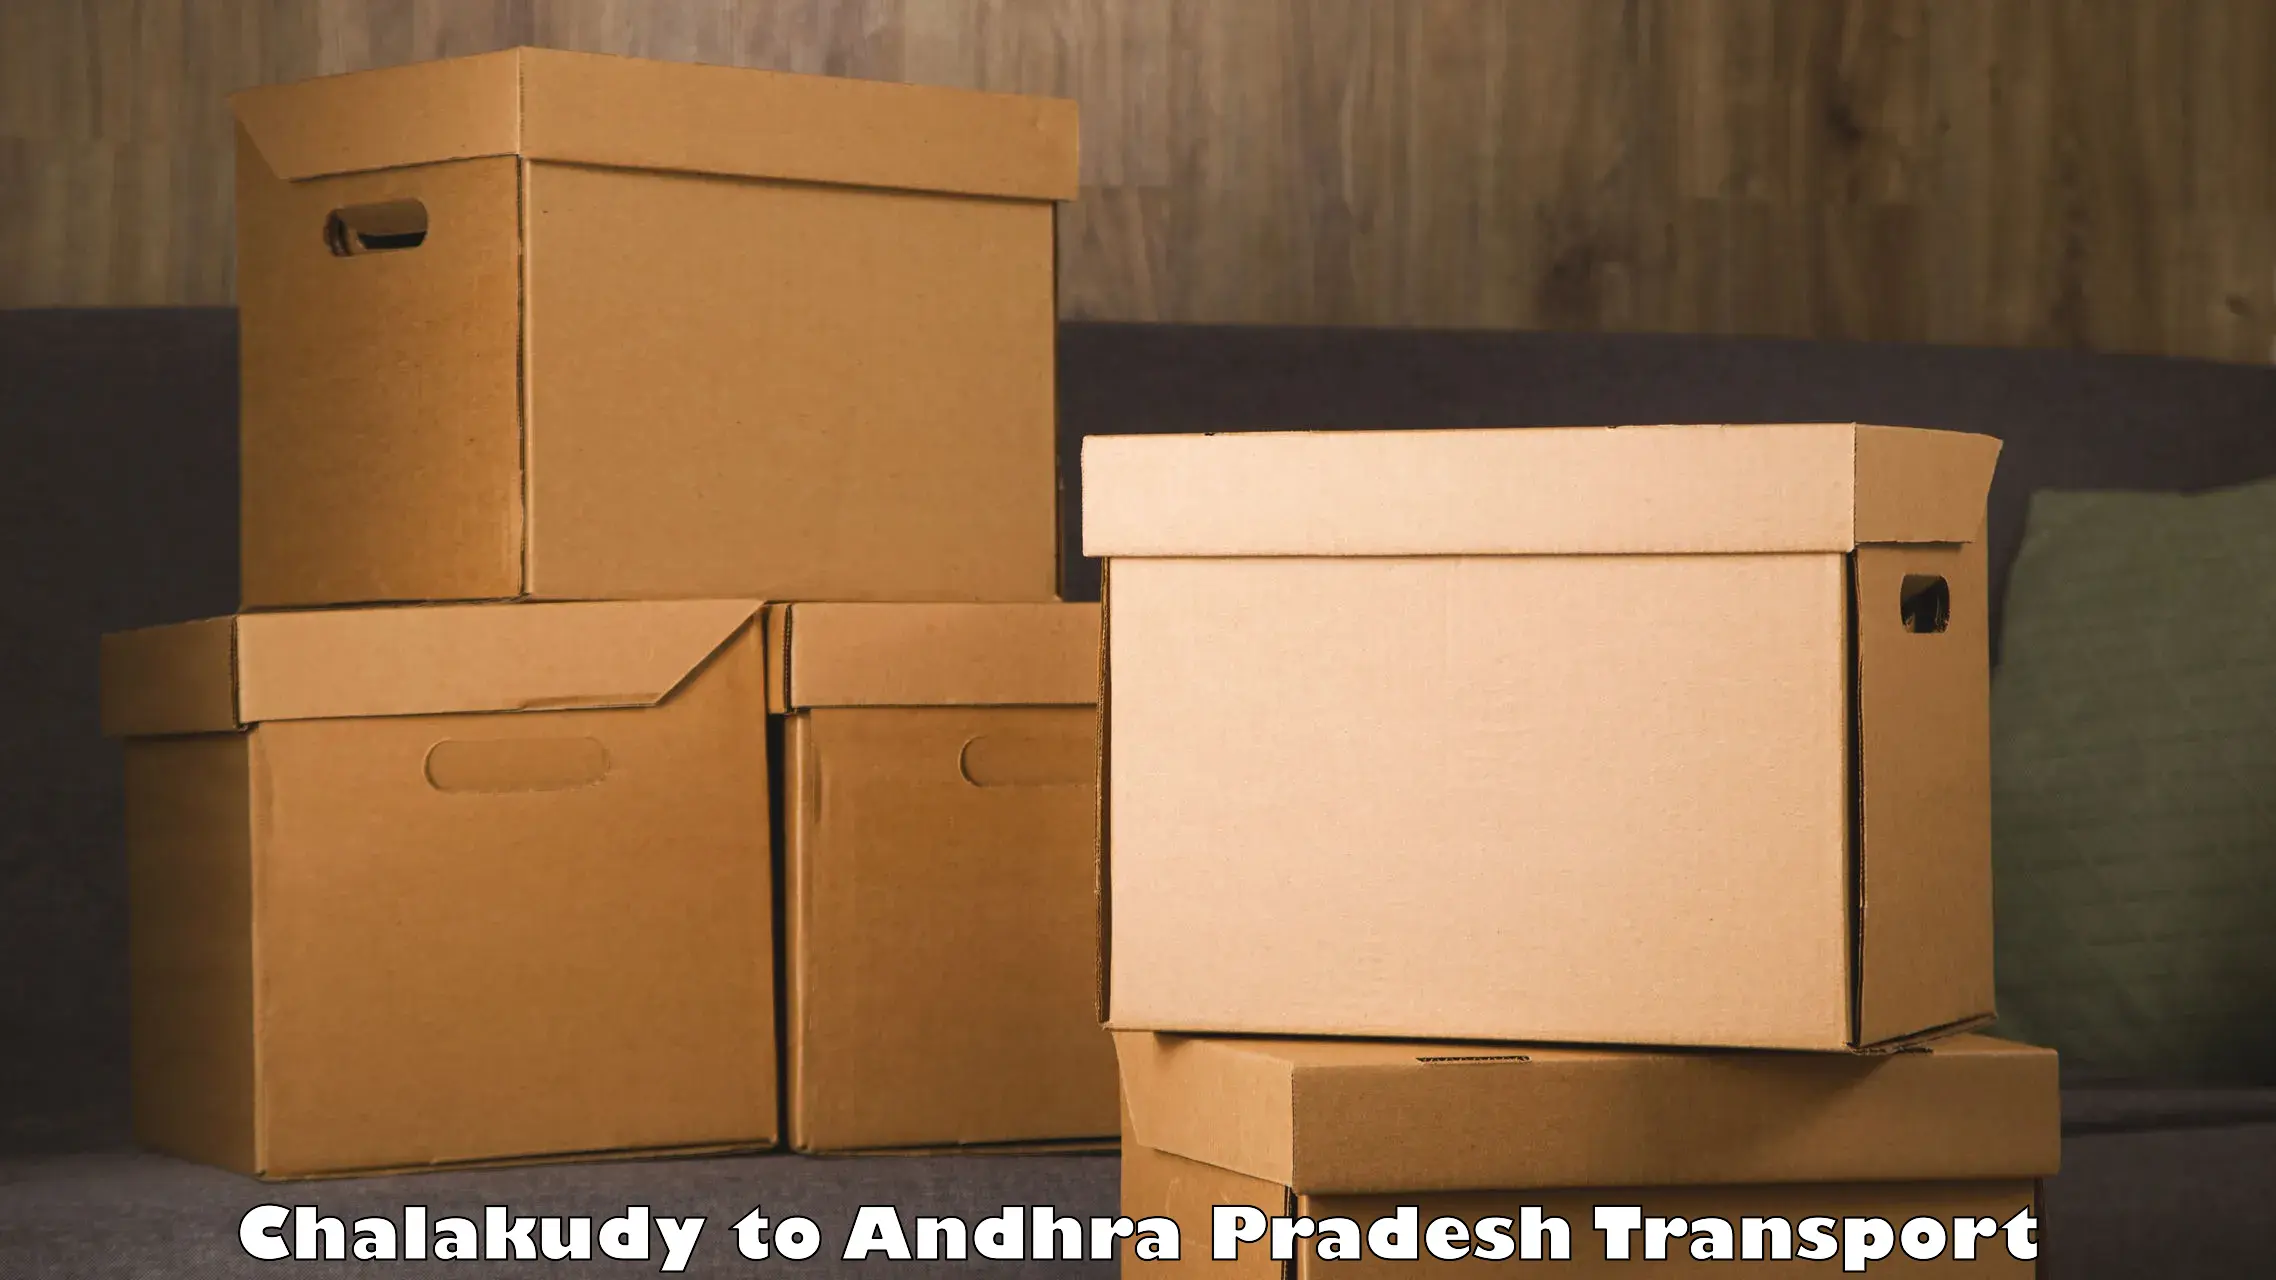 Nationwide transport services Chalakudy to Andhra Pradesh